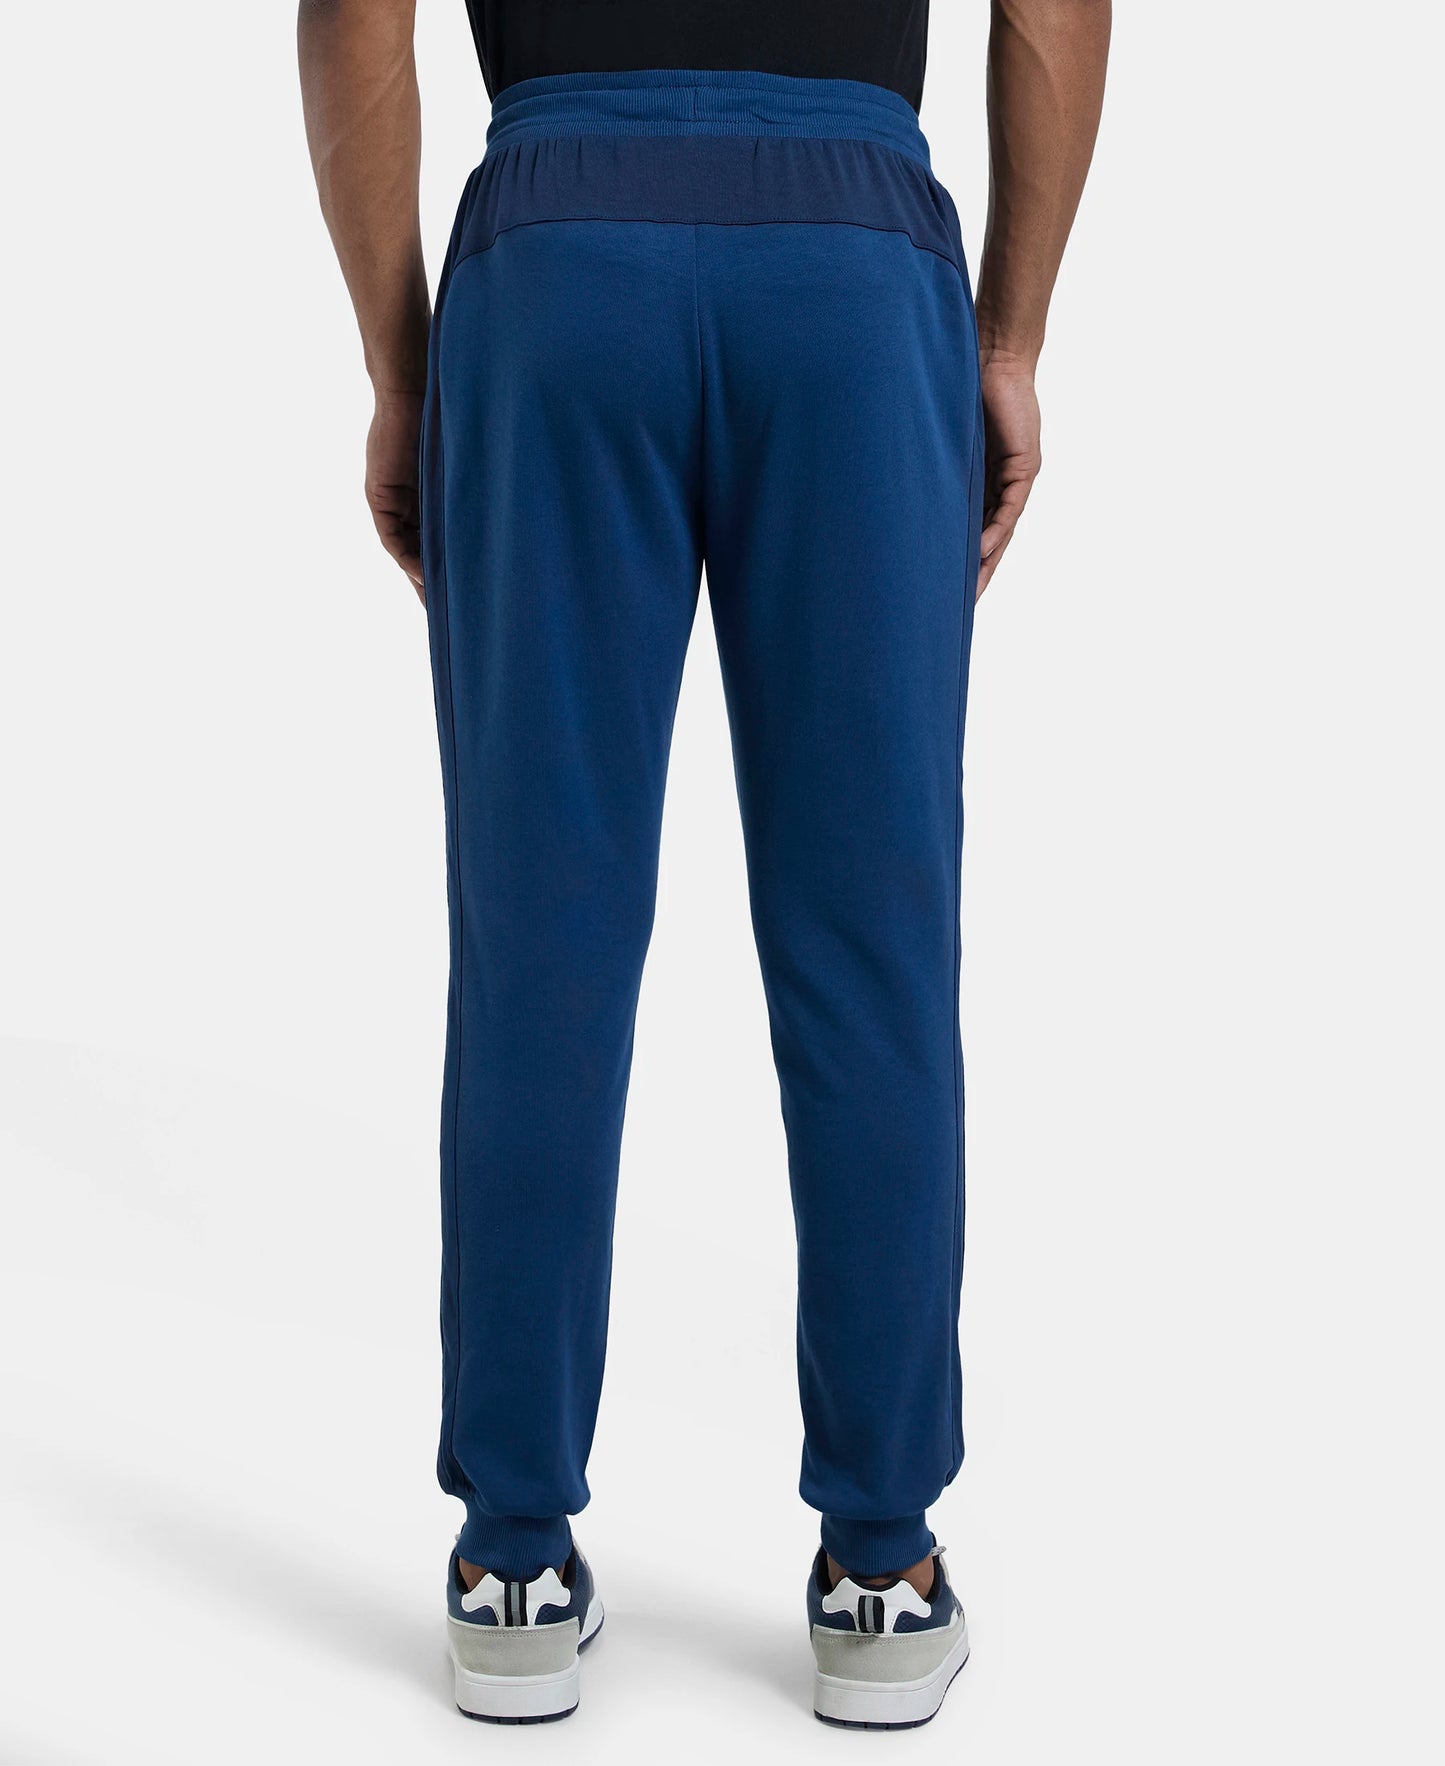 Super Combed Cotton Rich Slim Fit Jogger with Zipper Pockets - Insignia Blue & Navy-3